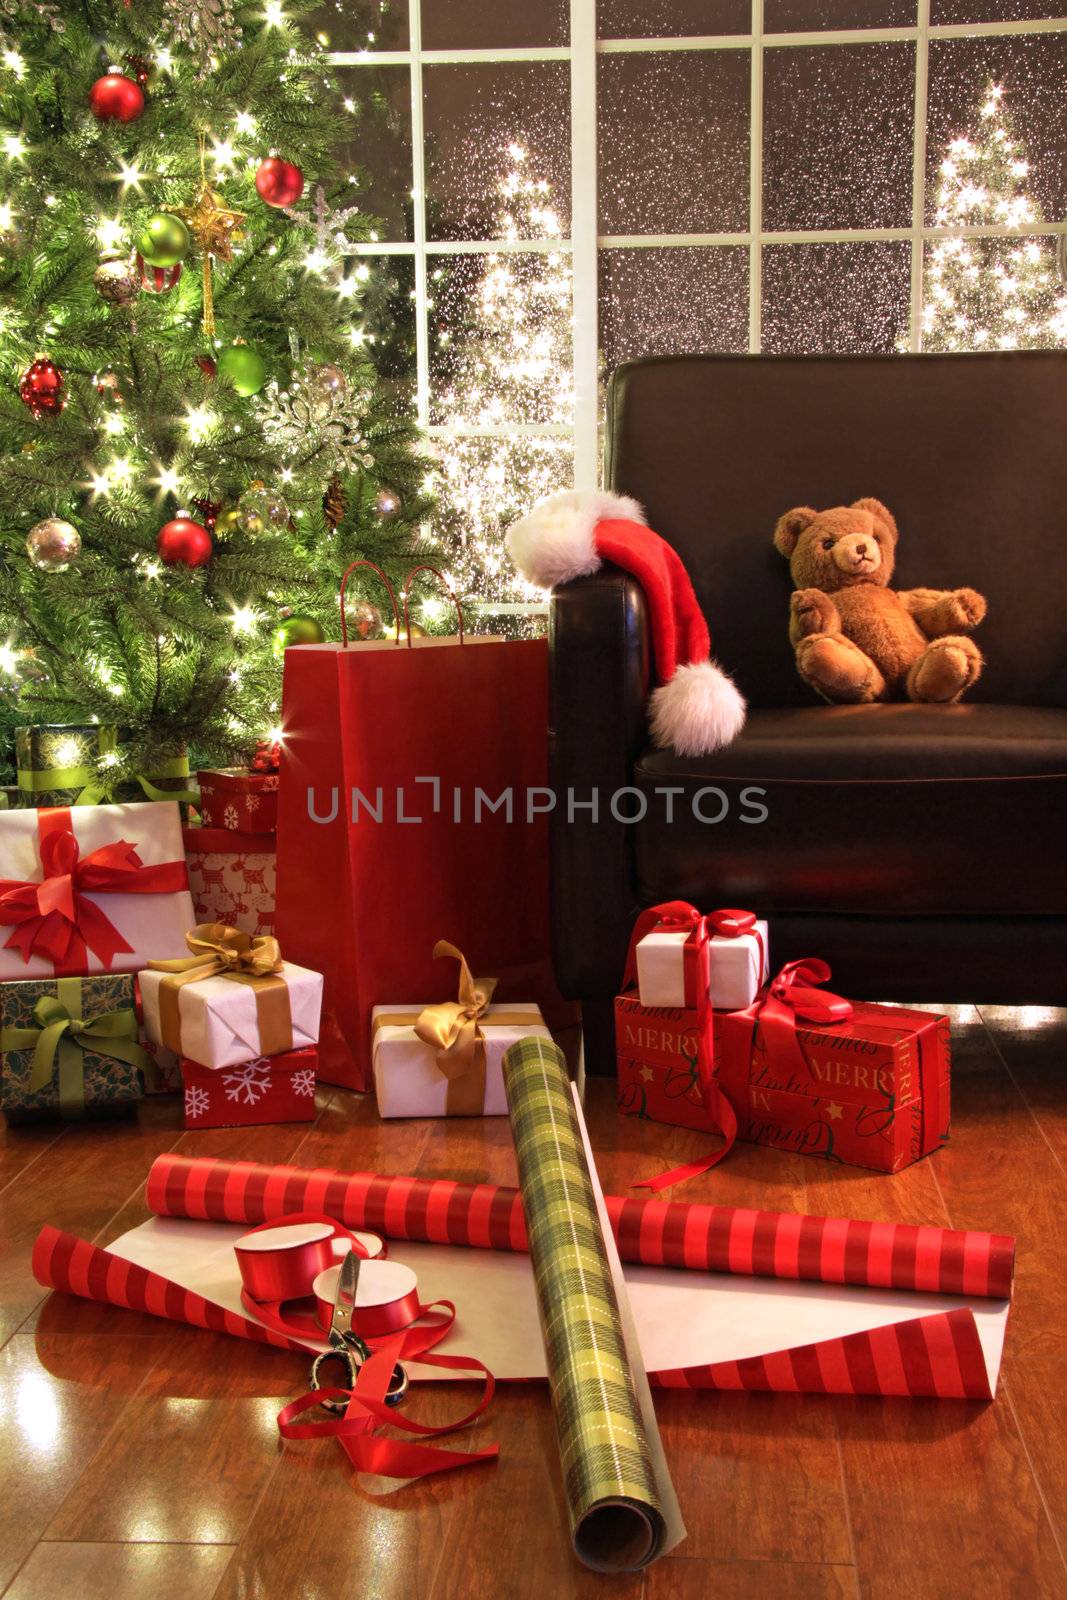 Christmas tree with gifts and teddy bear on chair